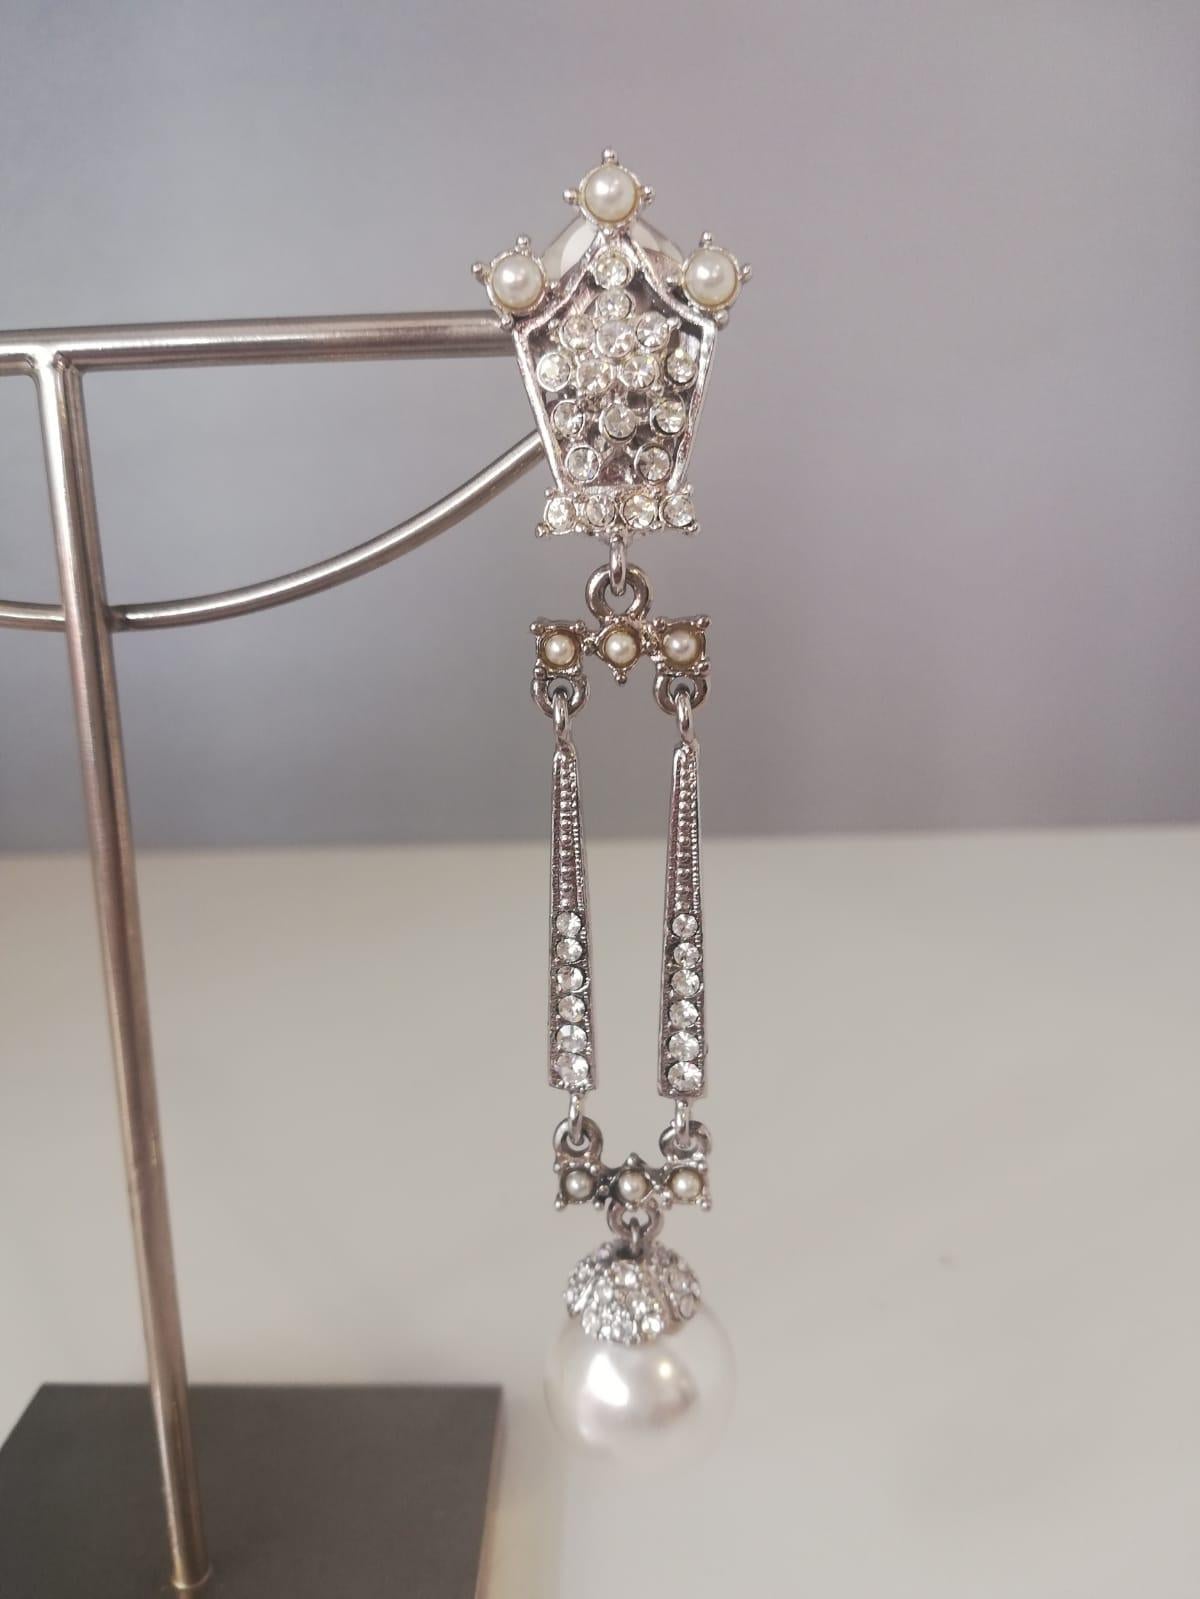 Beautiful and chic earrings by Carlo Zini
Non allergenic rhodium
Amazing combinations of faux pearls, beads and swarovski crystals 
Clip on closure, pierced on request
Length cm 9 (3.54 inches)
100% Artisanal work, made in Milan
Worldwide express